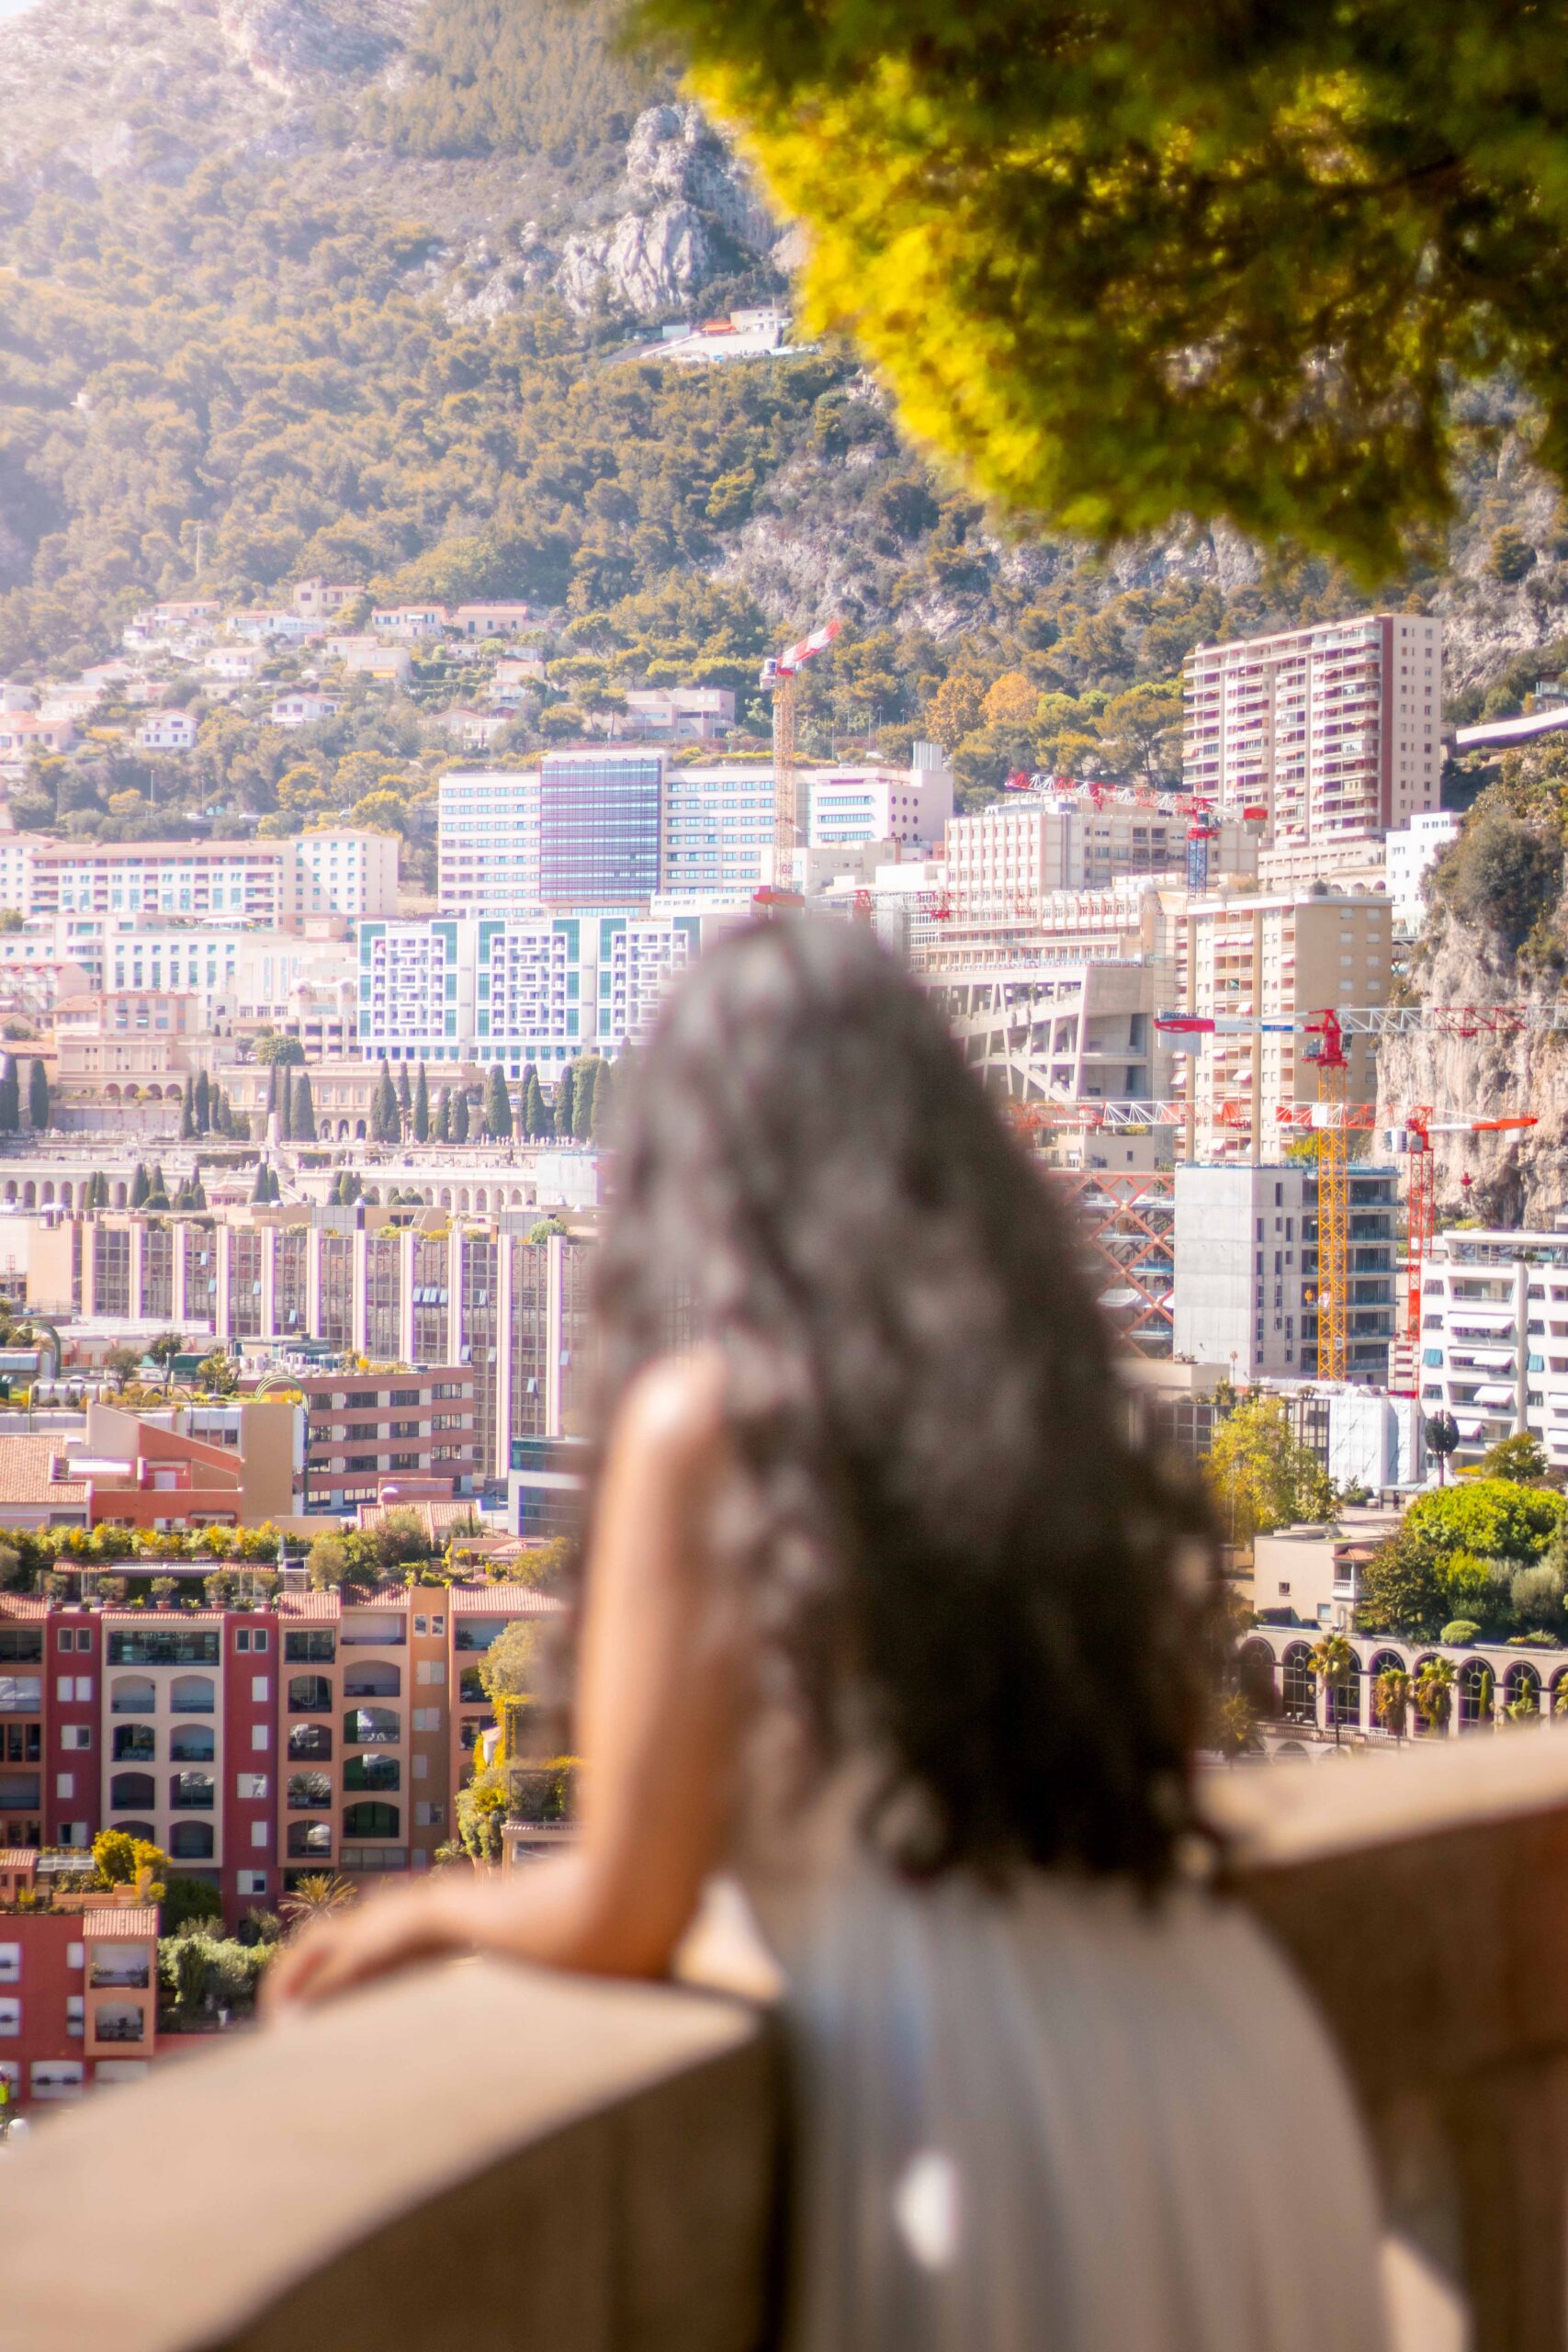 Woman wearing a white dress posing in a balcony at the Saint-Martin Gardens located on The Rock ("Le Rocher") during a sunny day in Monaco